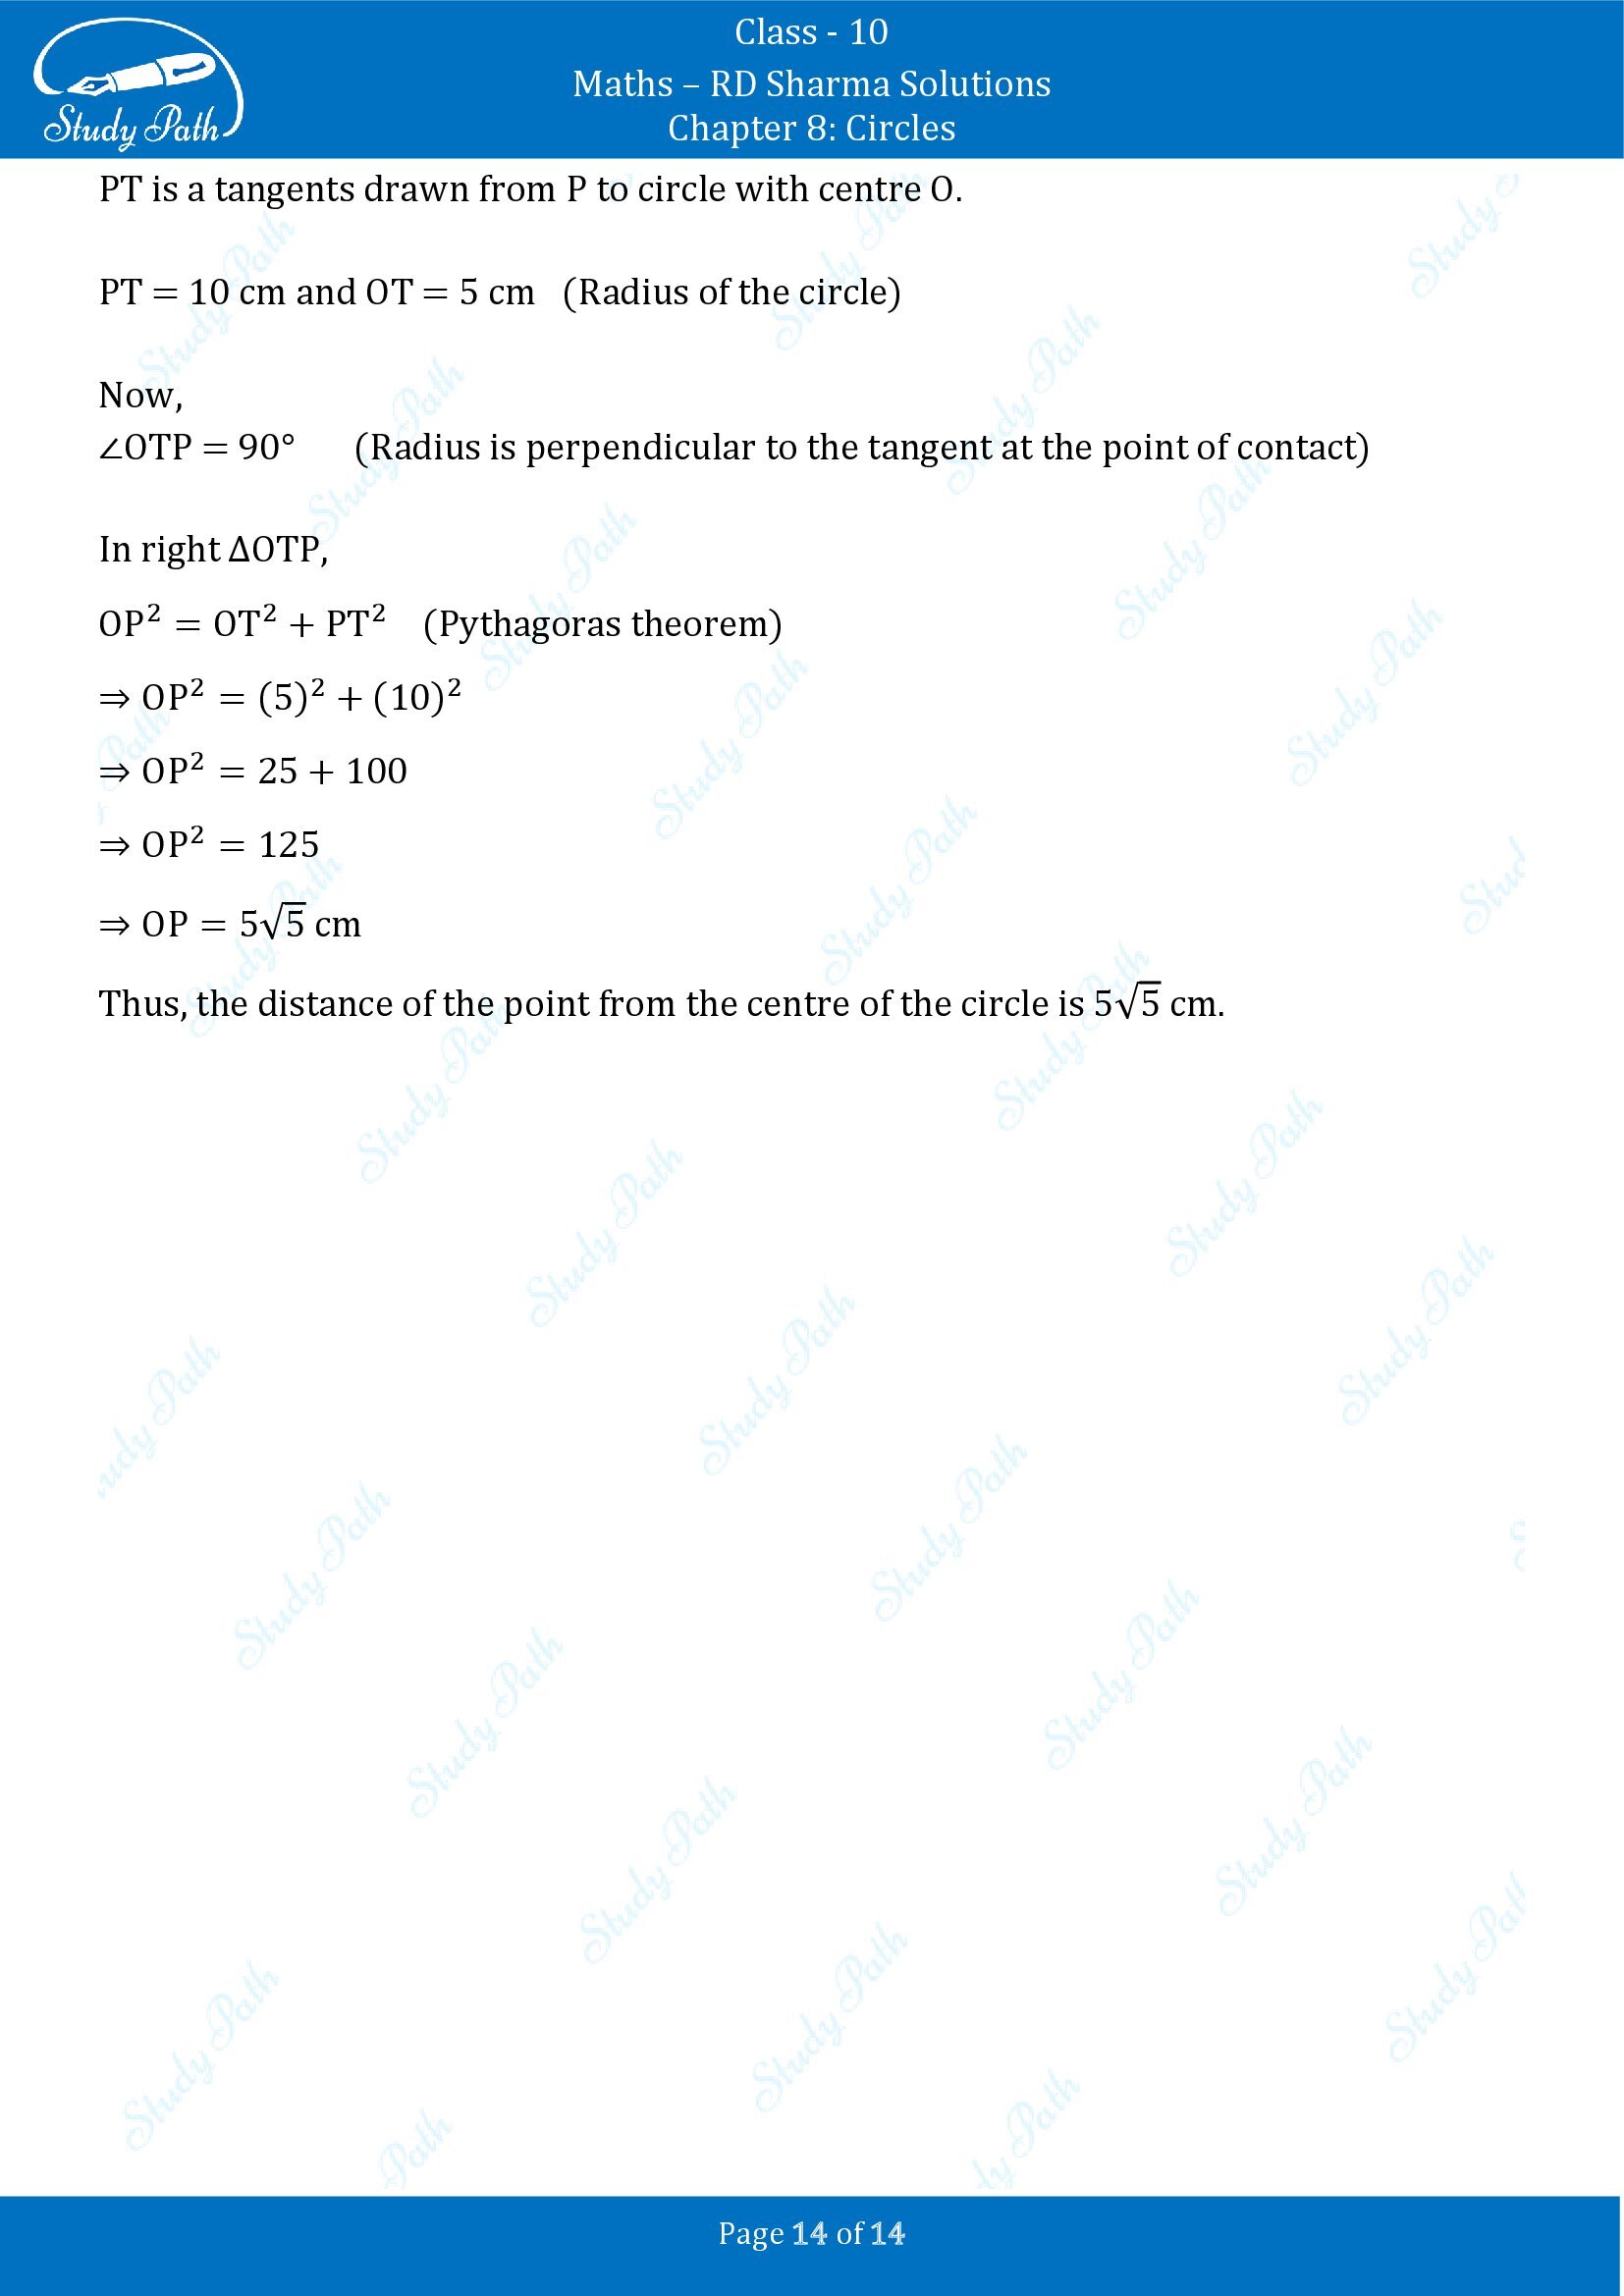 RD Sharma Solutions Class 10 Chapter 8 Circles Fill in the Blank Type Questions FBQs 00014